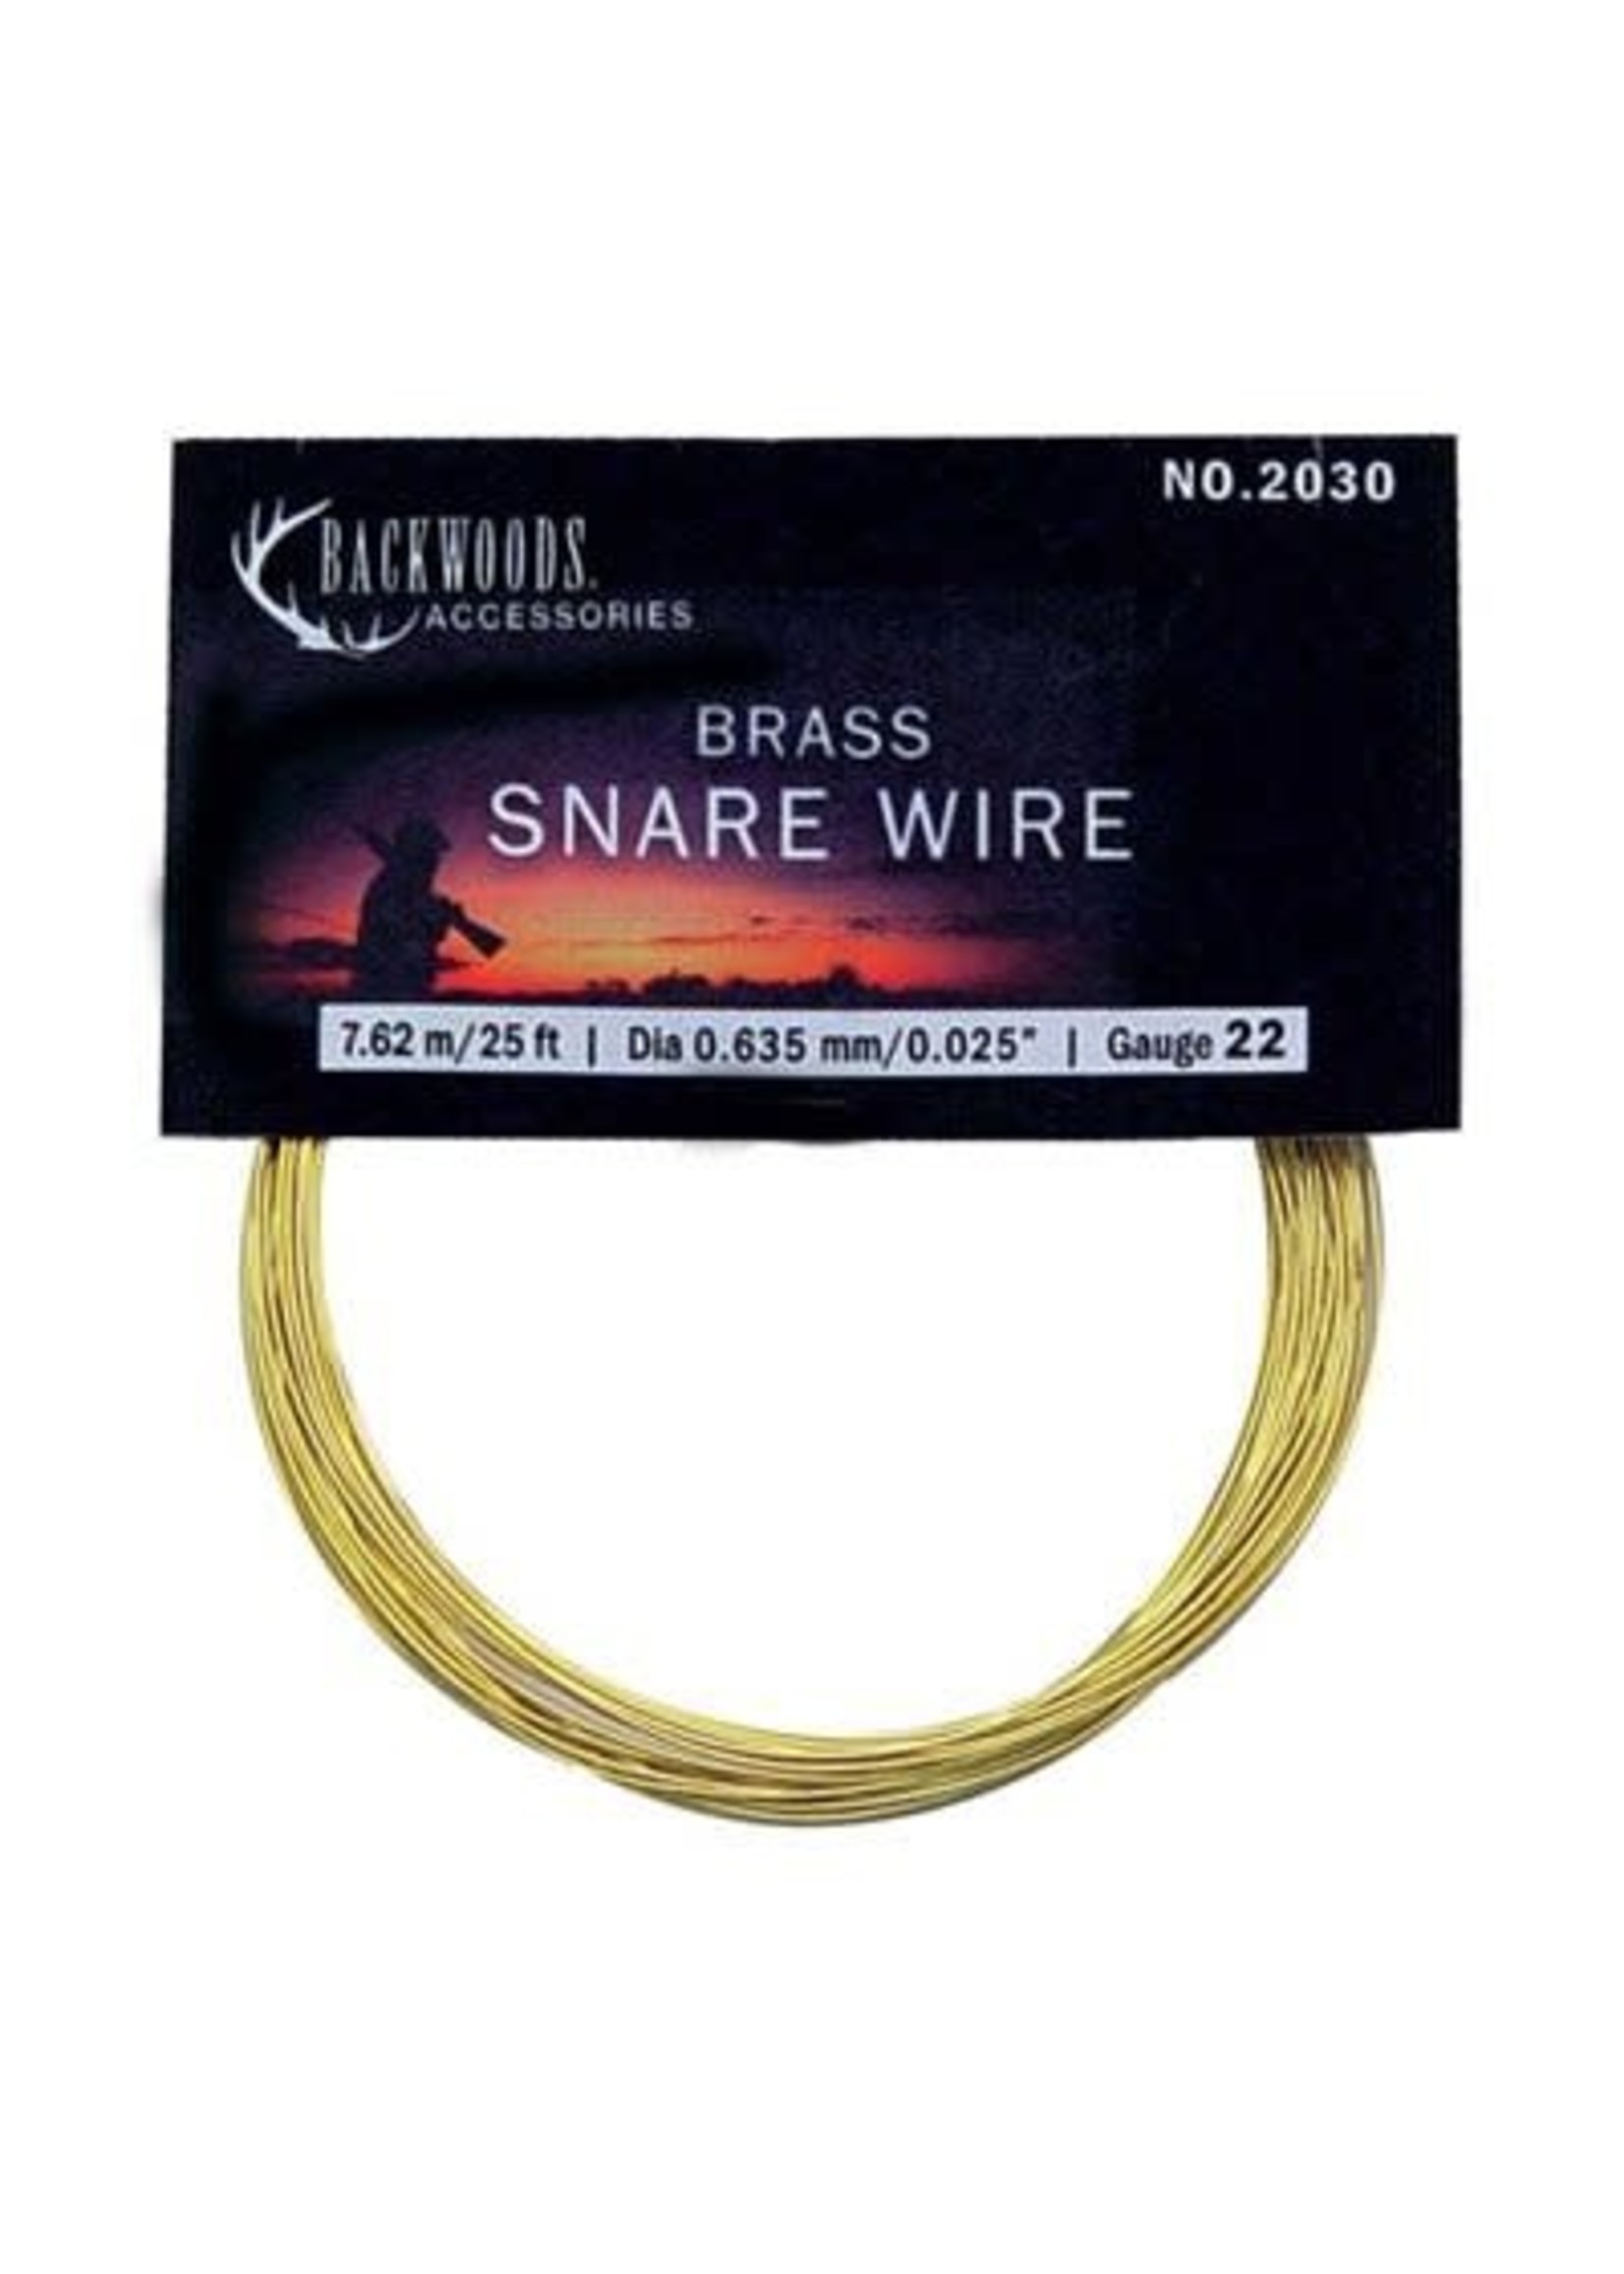 Backwoods Snare Wire, Brass, 25', 22g